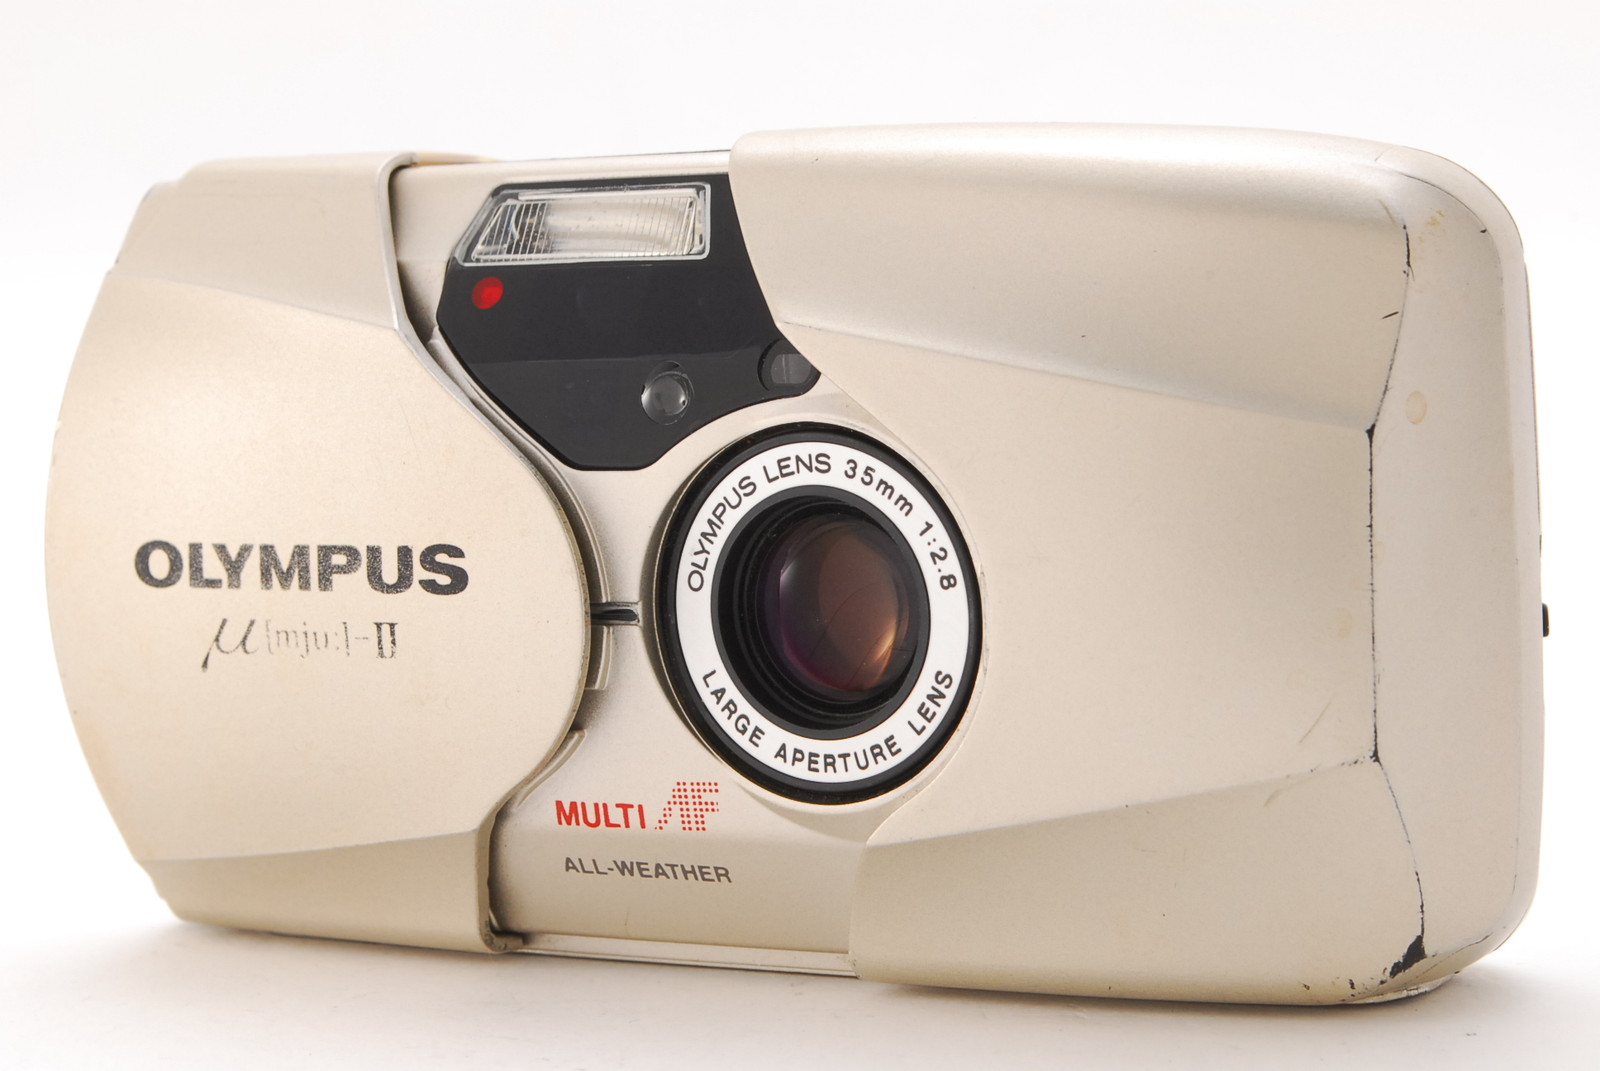 PROMOTION. EXC+++++ Olympus μ mju II 35mm f/2.8 35mm Film Point and Shoot Camera from Japan